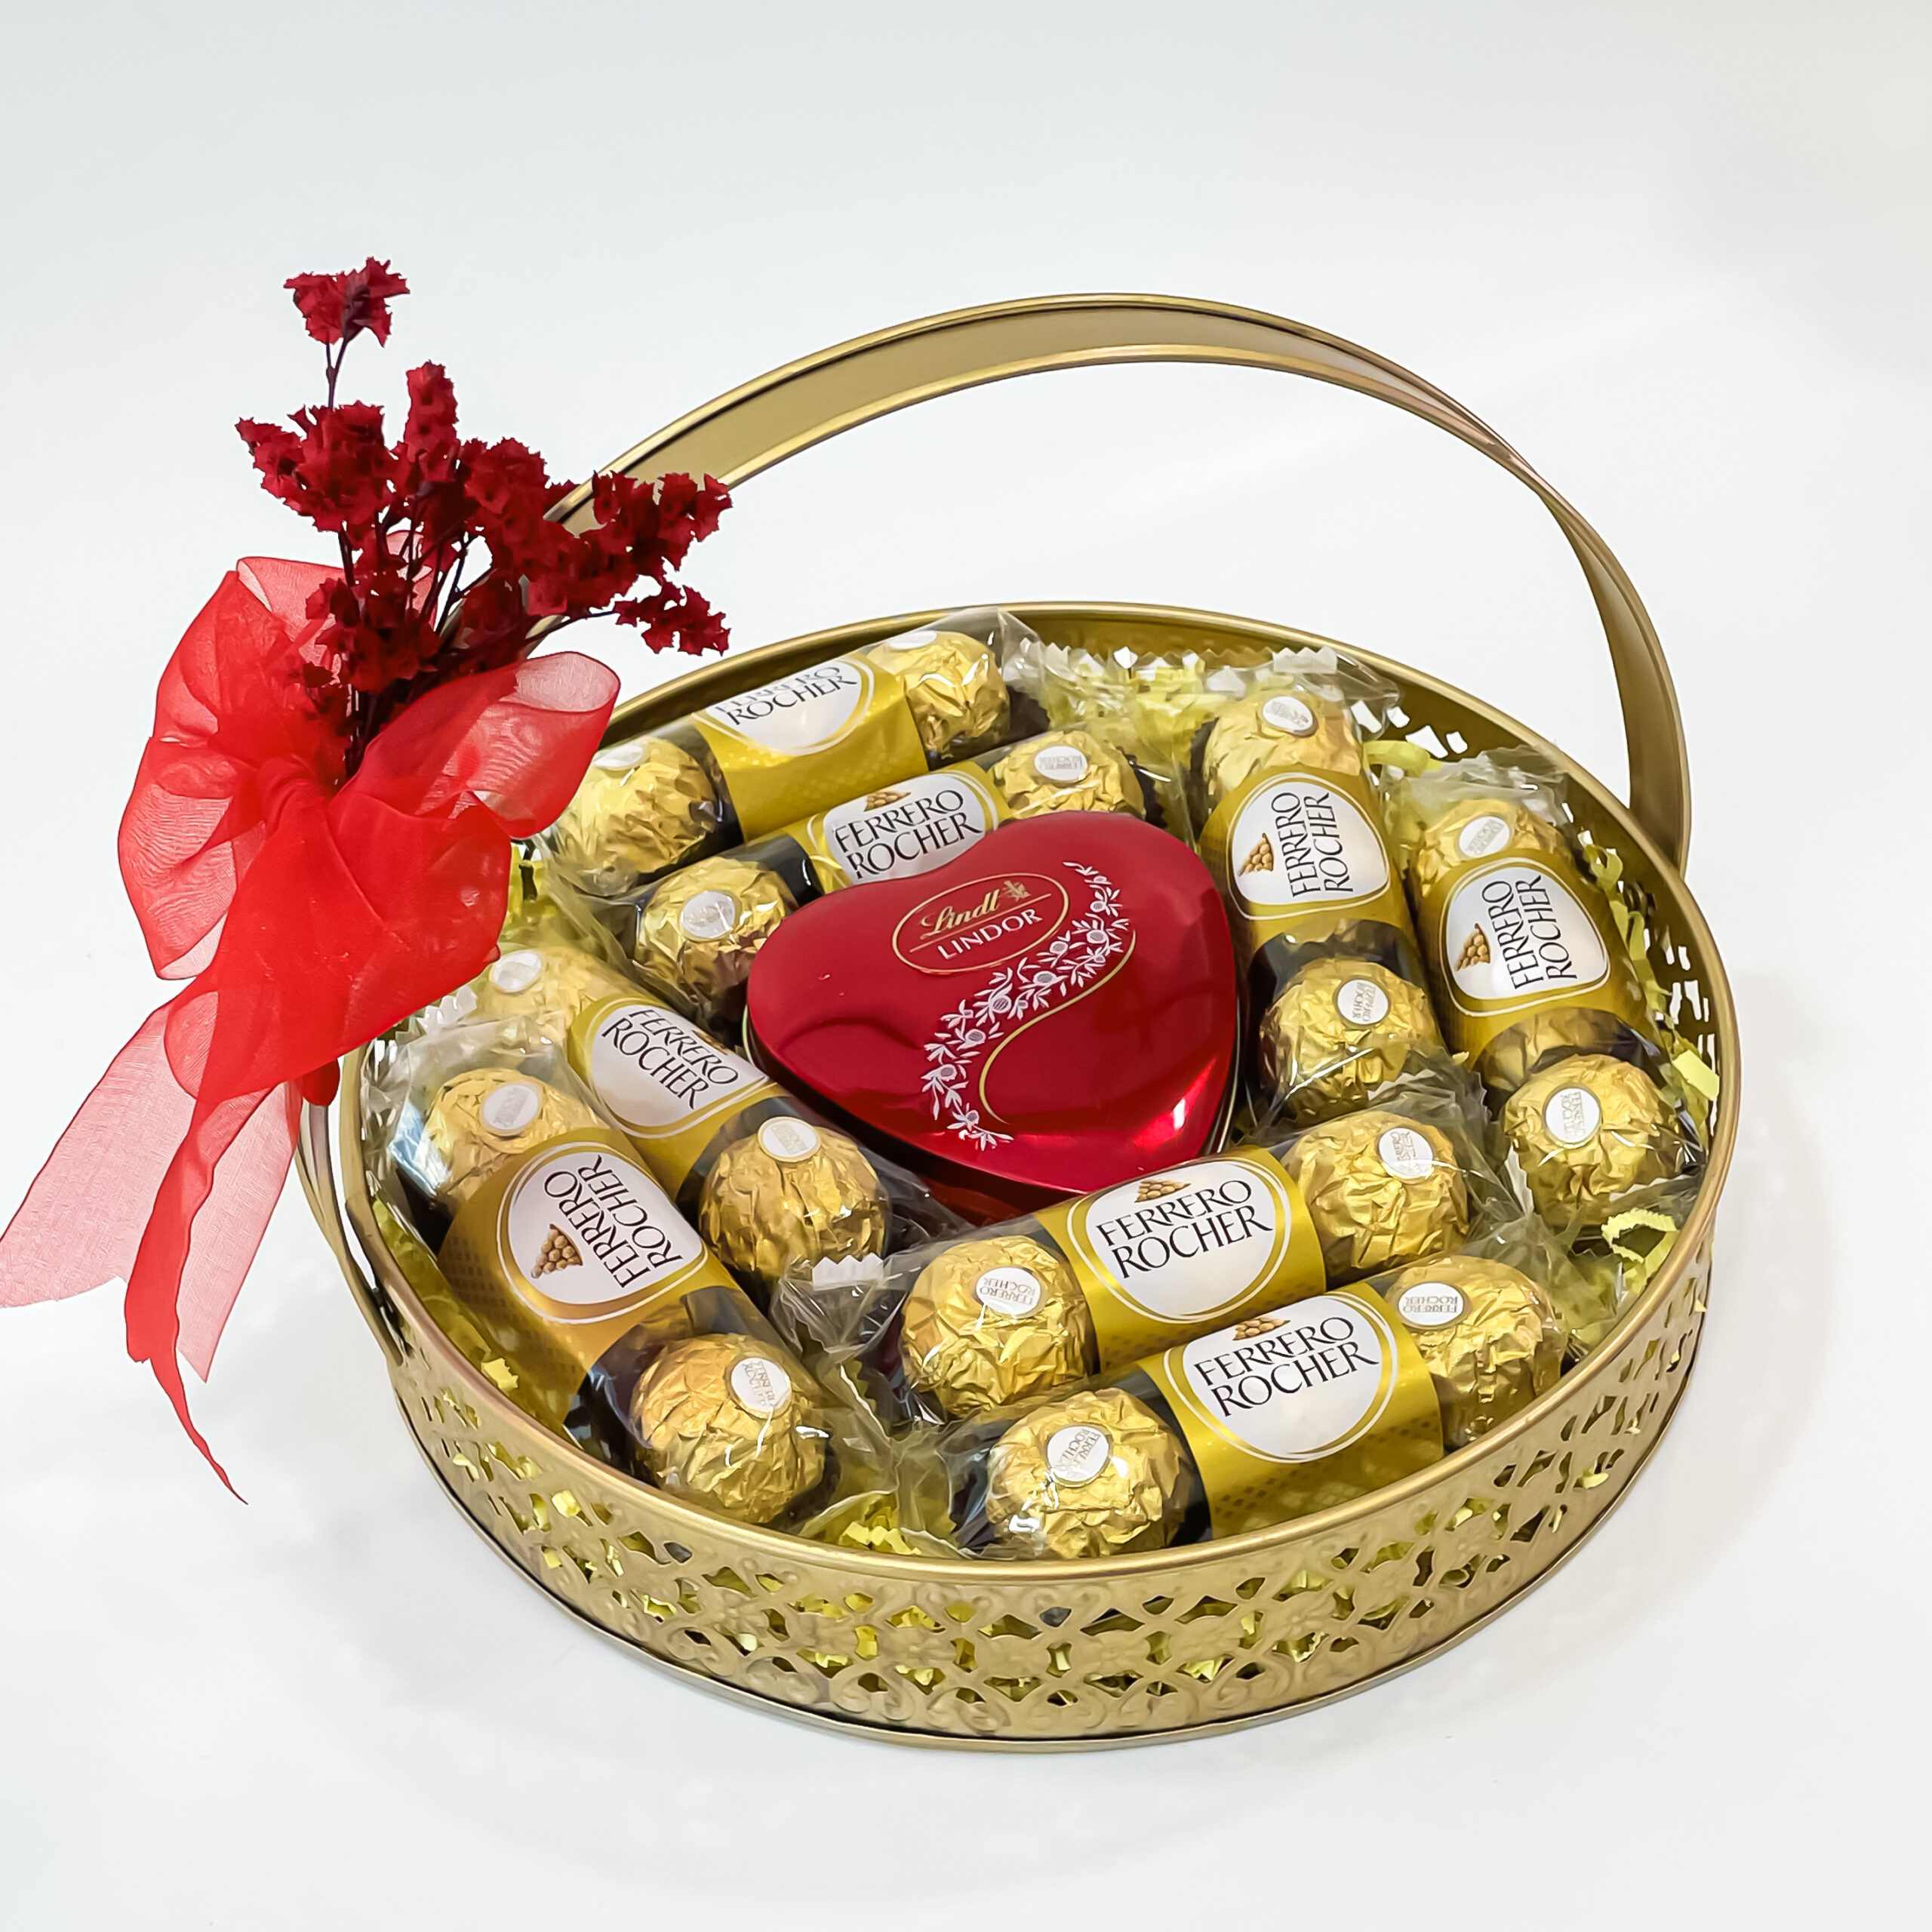 SFU E Com Imported Chocolates with Beautiful Net Basket | Chocolate Gift  Hamper for Valentine | 004 : Amazon.in: Grocery & Gourmet Foods